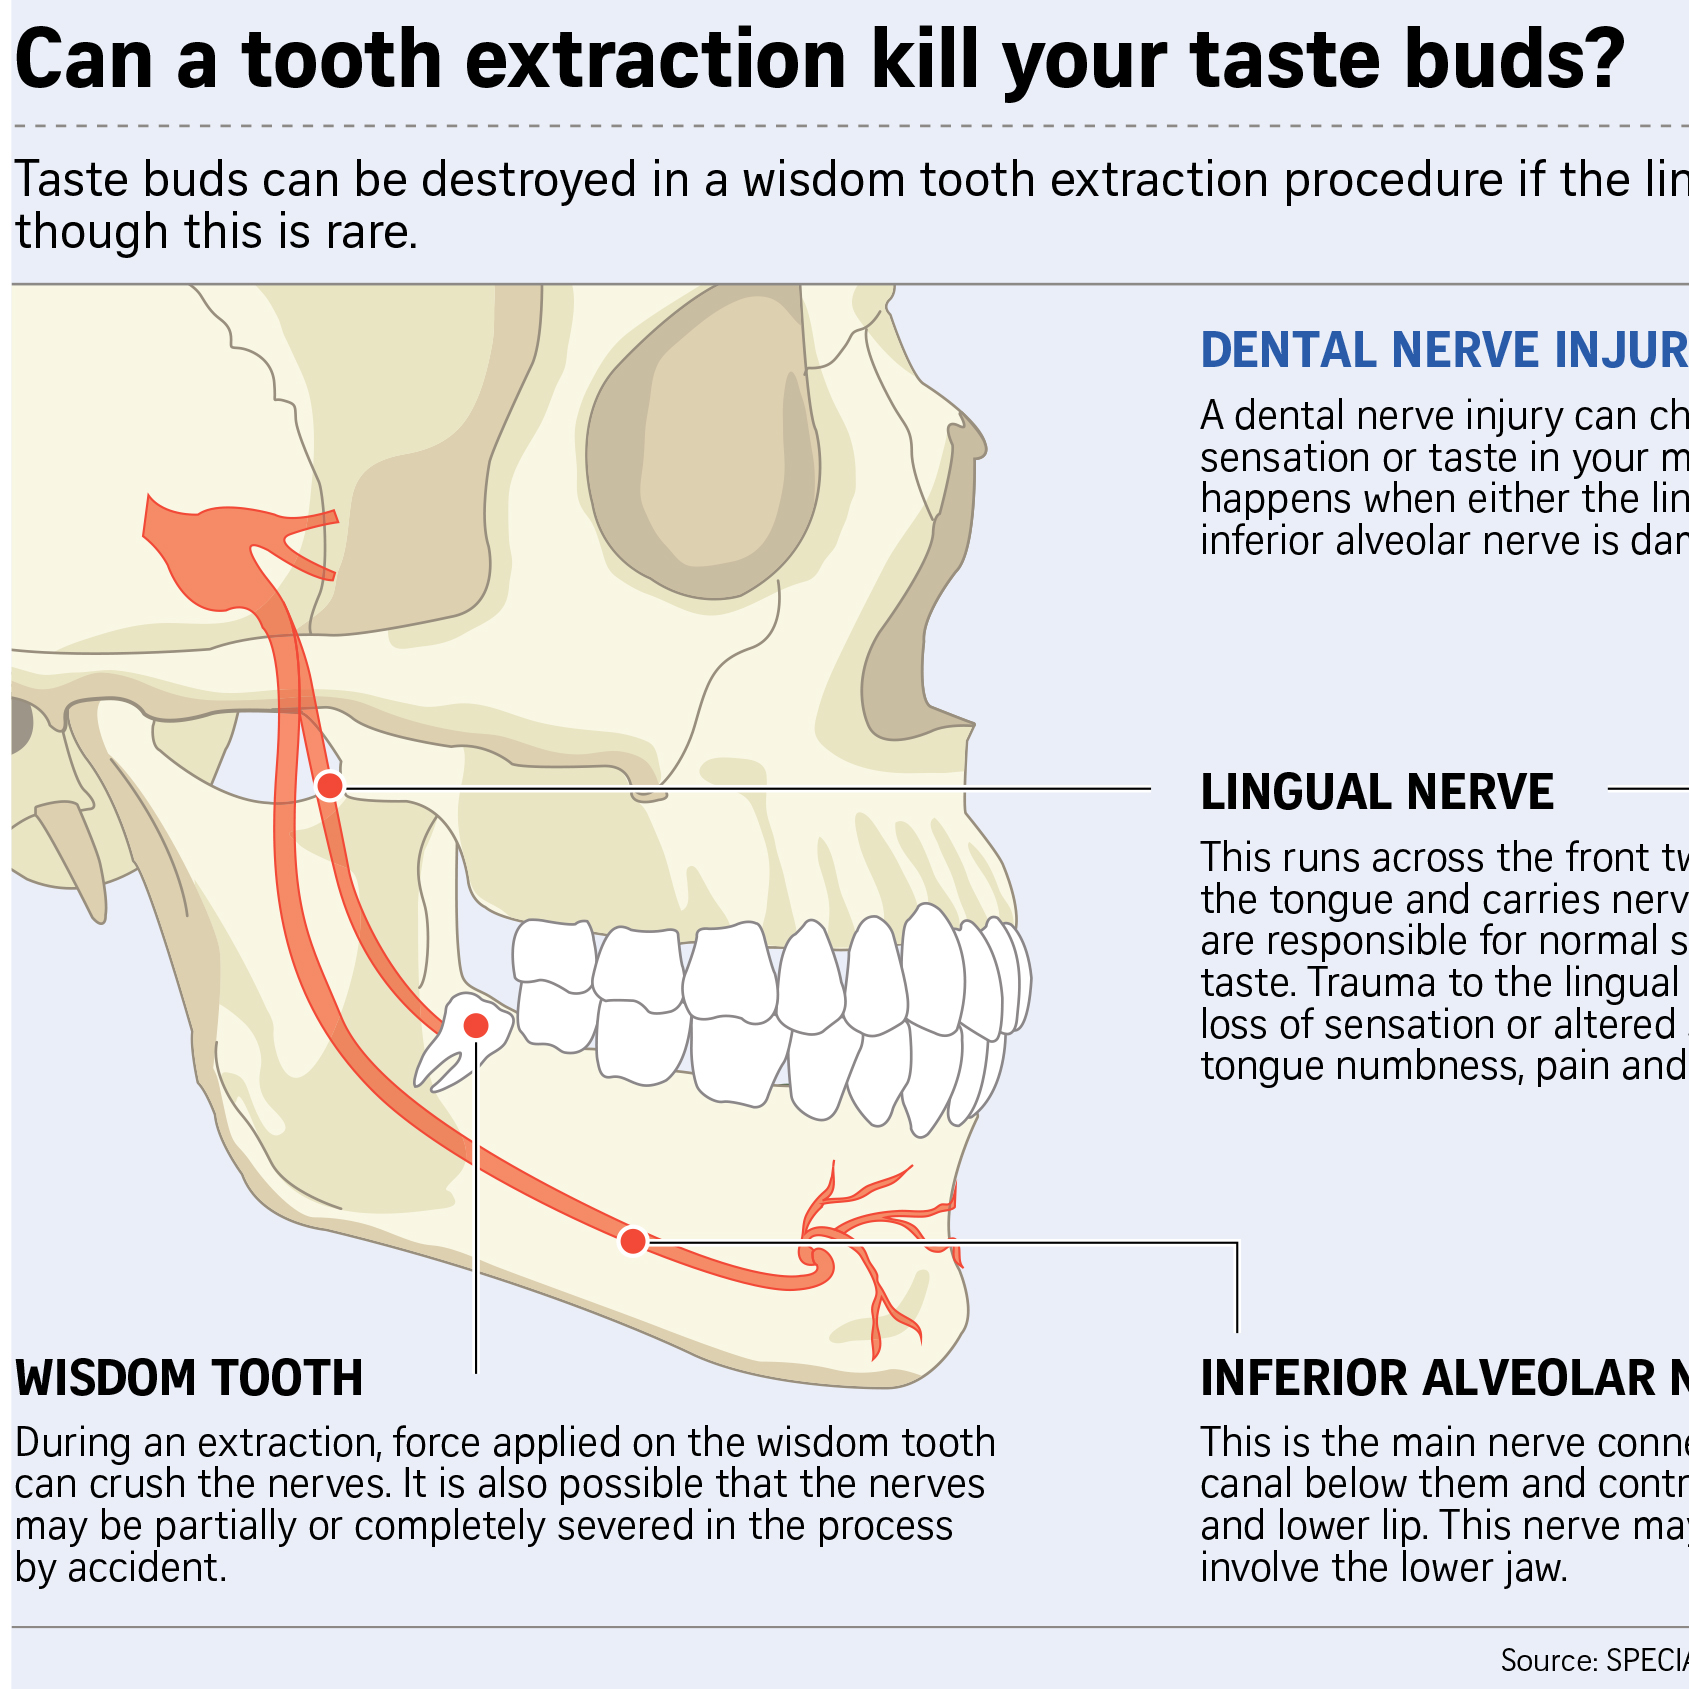 The Straits Times (9 August 2019): An oral surgeon may be needed for complicated wisdom tooth cases